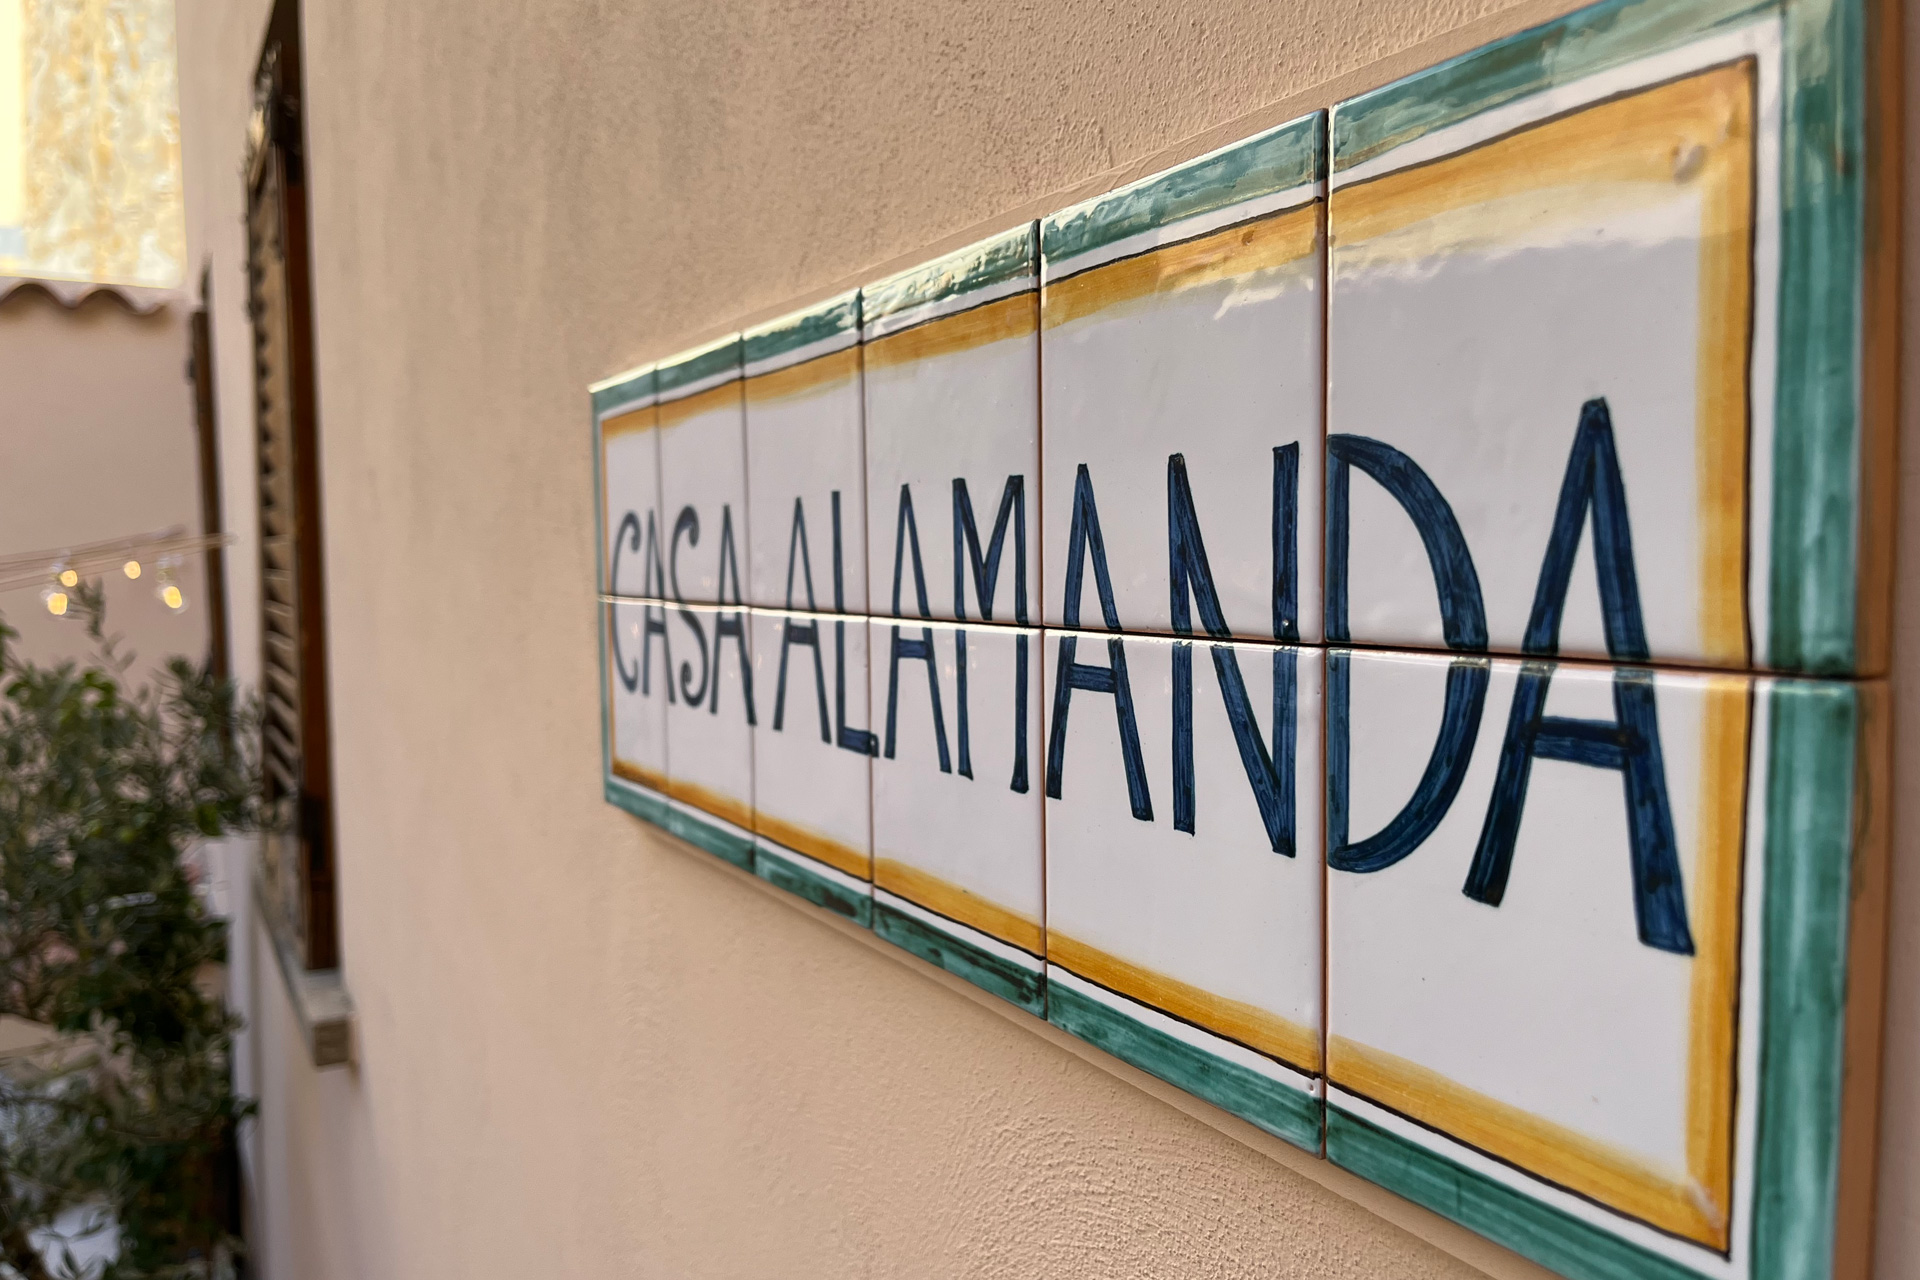 White sign with blue painted letters spelling 'Casa Alamanda'